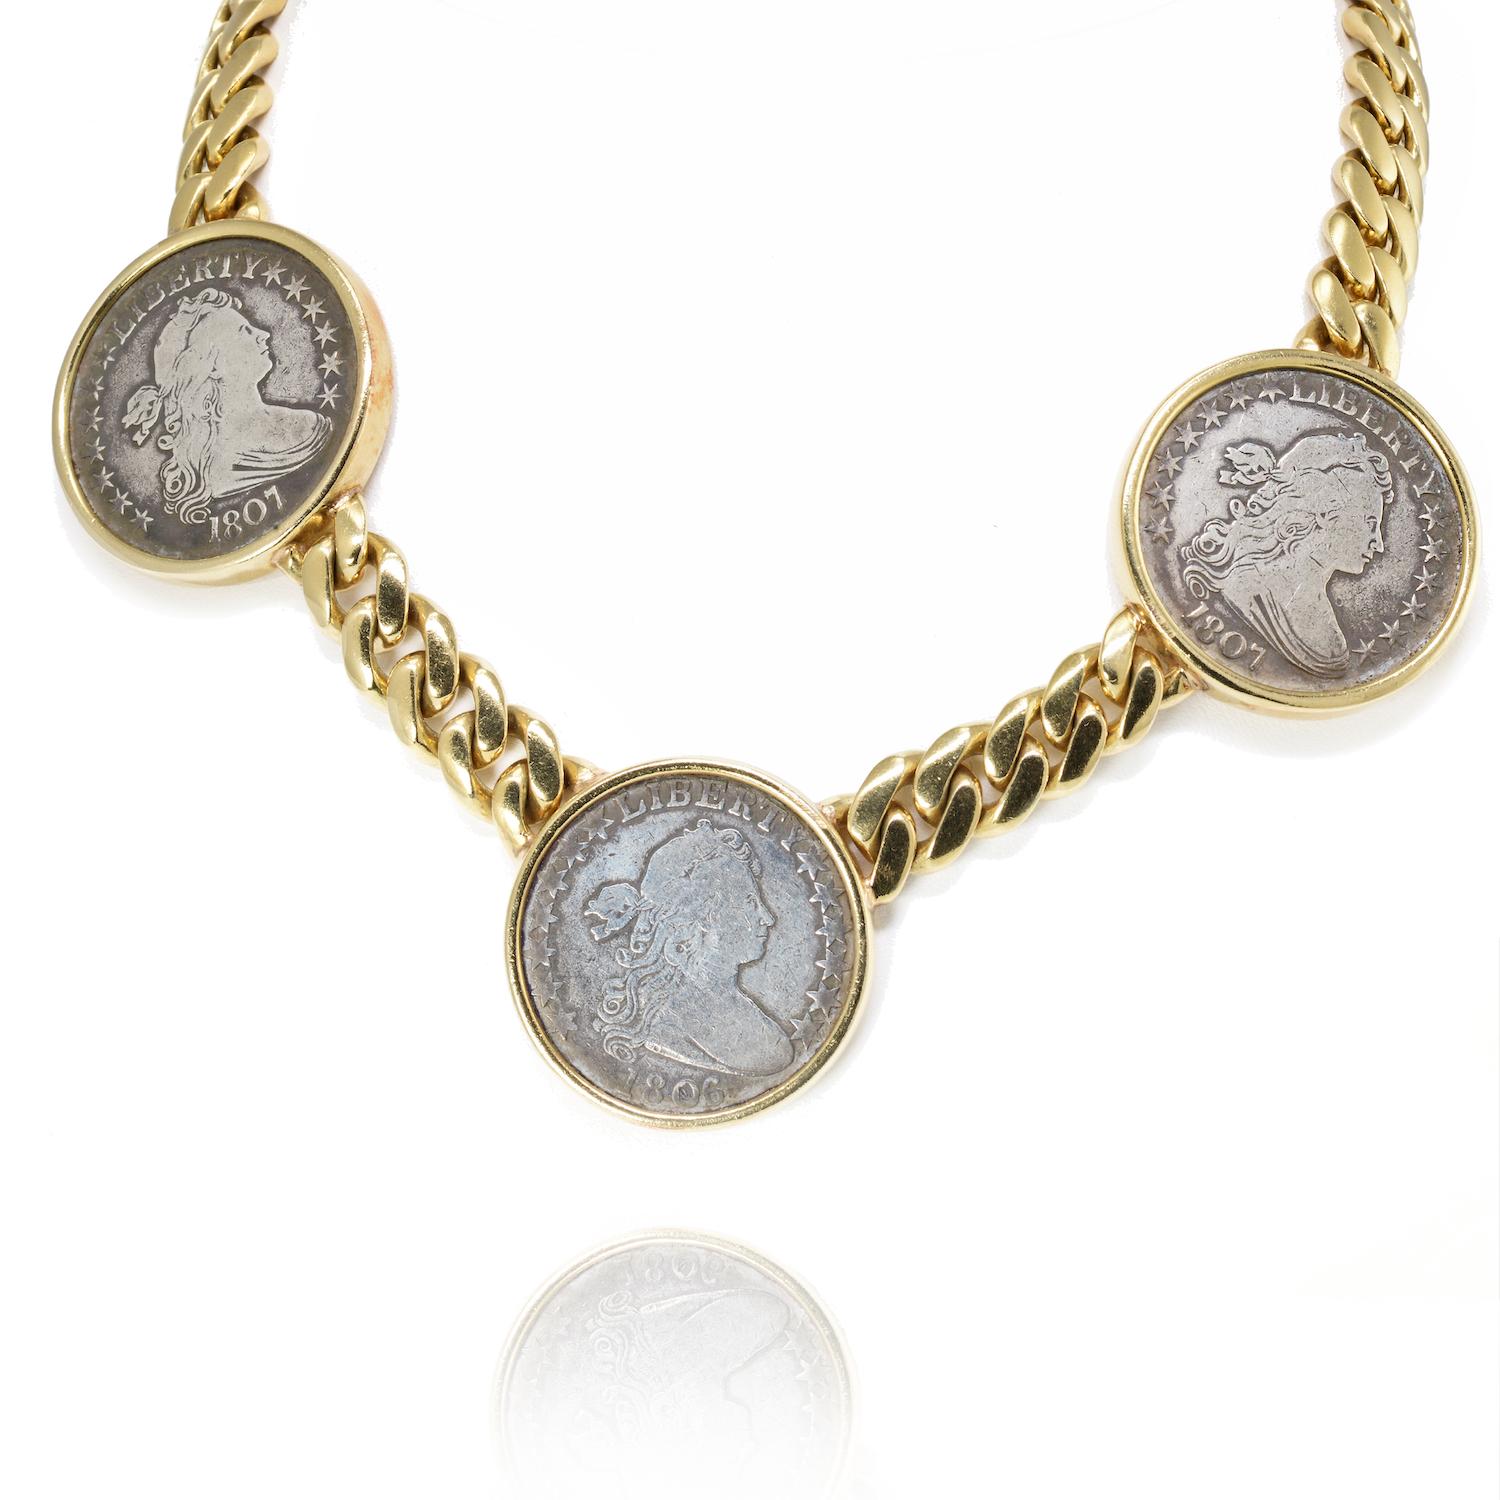 Rare Authentic Bvlgari Bi-centennial 3-Coin Necklace in 18K Yellow Gold. Weight is 195 g with coins and given each coin weighs 10.25 g the total 18k gold weight is 164.25 g.

You will be hard-pressed to find another Bvlgari necklace like this;  the